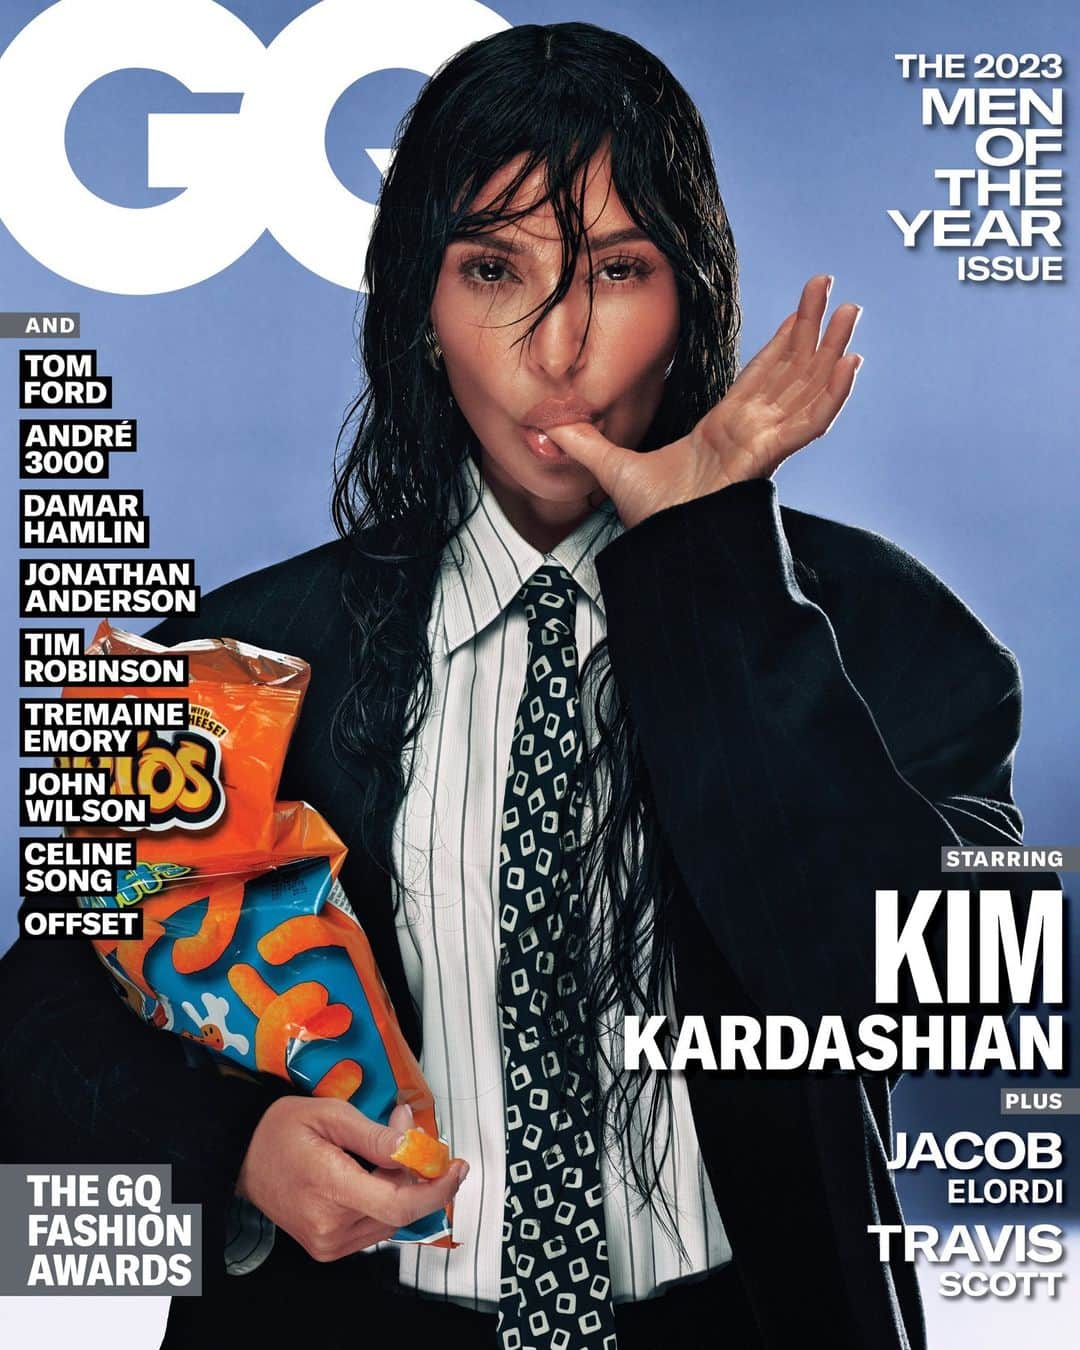 GQのインスタグラム：「Presenting the next #GQMOTY cover star: Kim Kardashian.  As @kimkardashian prepared to launch her latest mega-enterprise, @skims Mens, she spent a lot of time revisiting the memory of her father, the late Robert Kardashian. For GQ’s Men of the Year issue, Kim joined her mother and sisters to talk about his great style, his last days, and how, 20 years after his death, he continues to shape her life and work.  Read the cover story and see all the photos by @jack_bridgland_studio at the link in bio. #GQMOTY  Written by Sean Manning Photographer @jack_bridgland_studio Styled by @stella_greenspan Produced by Patrick Mapel @campproductions  Hair by @chrisappleton1 at The Wall Group Skin by @makeupbyariel / PRTNRS Set Design by @itsmyjello / Jones MGMT」